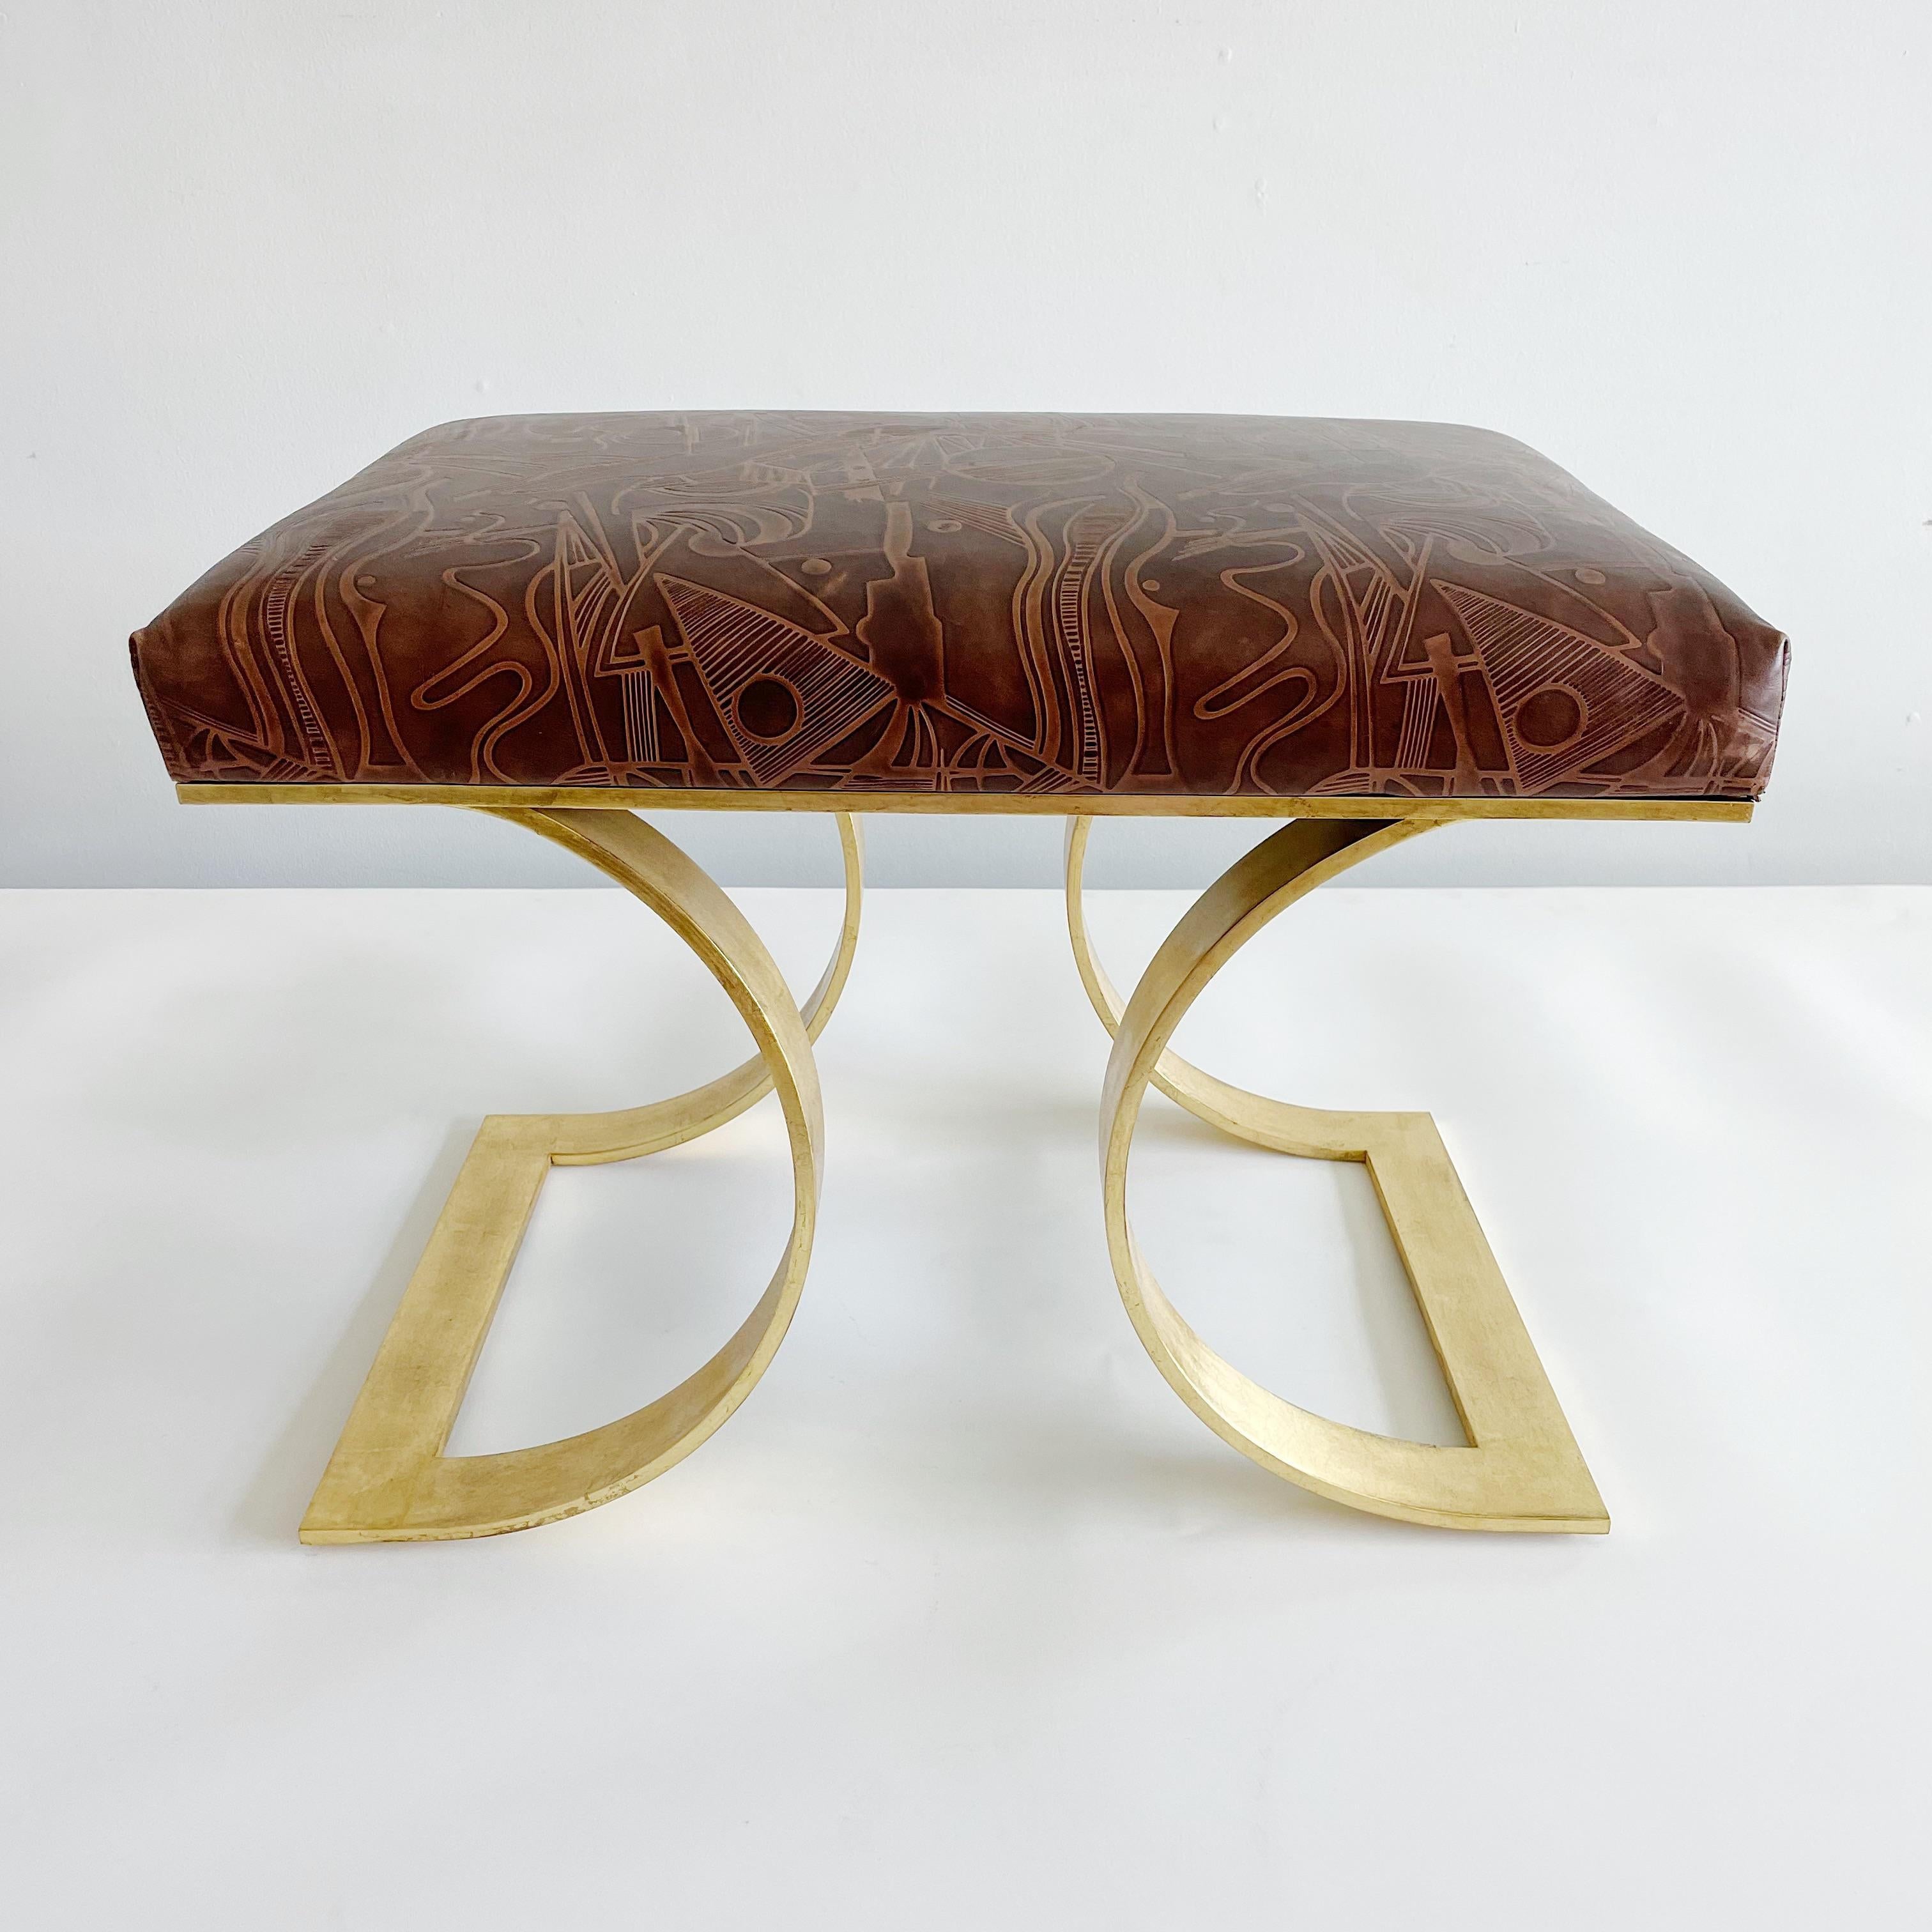 This is the original prototype for Karl Springers JMF bench. Executed in fabulous tooled leather with abstract design, gold leaf brass legs and gold leaf steel frame. Signed on underside and verified by Karl Springer LTD